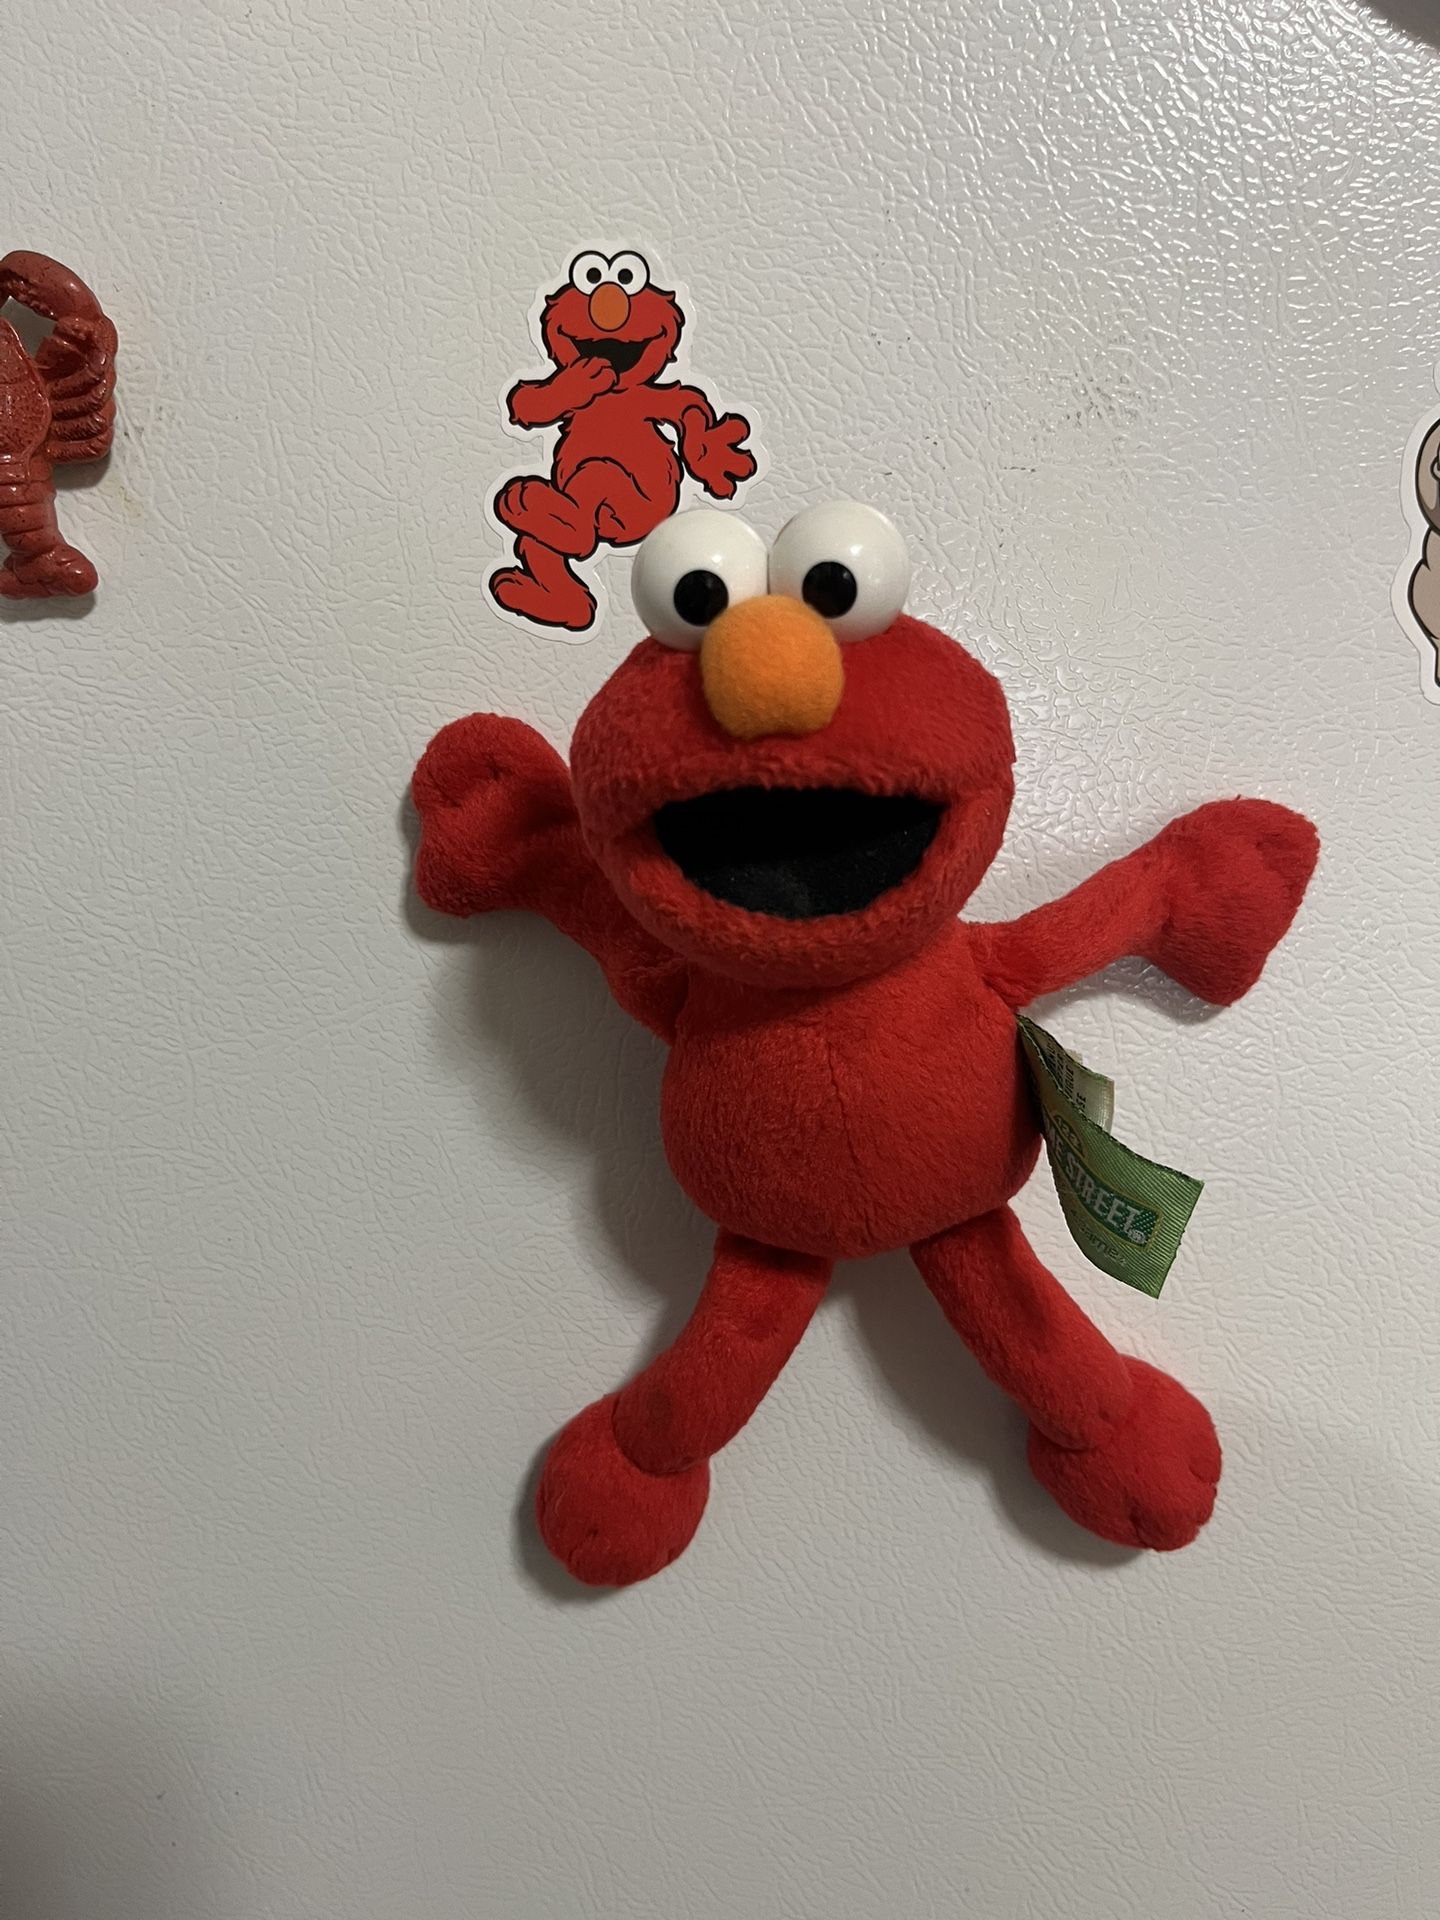 7 Inch Elmo Plush With Magnet Hands And Feet